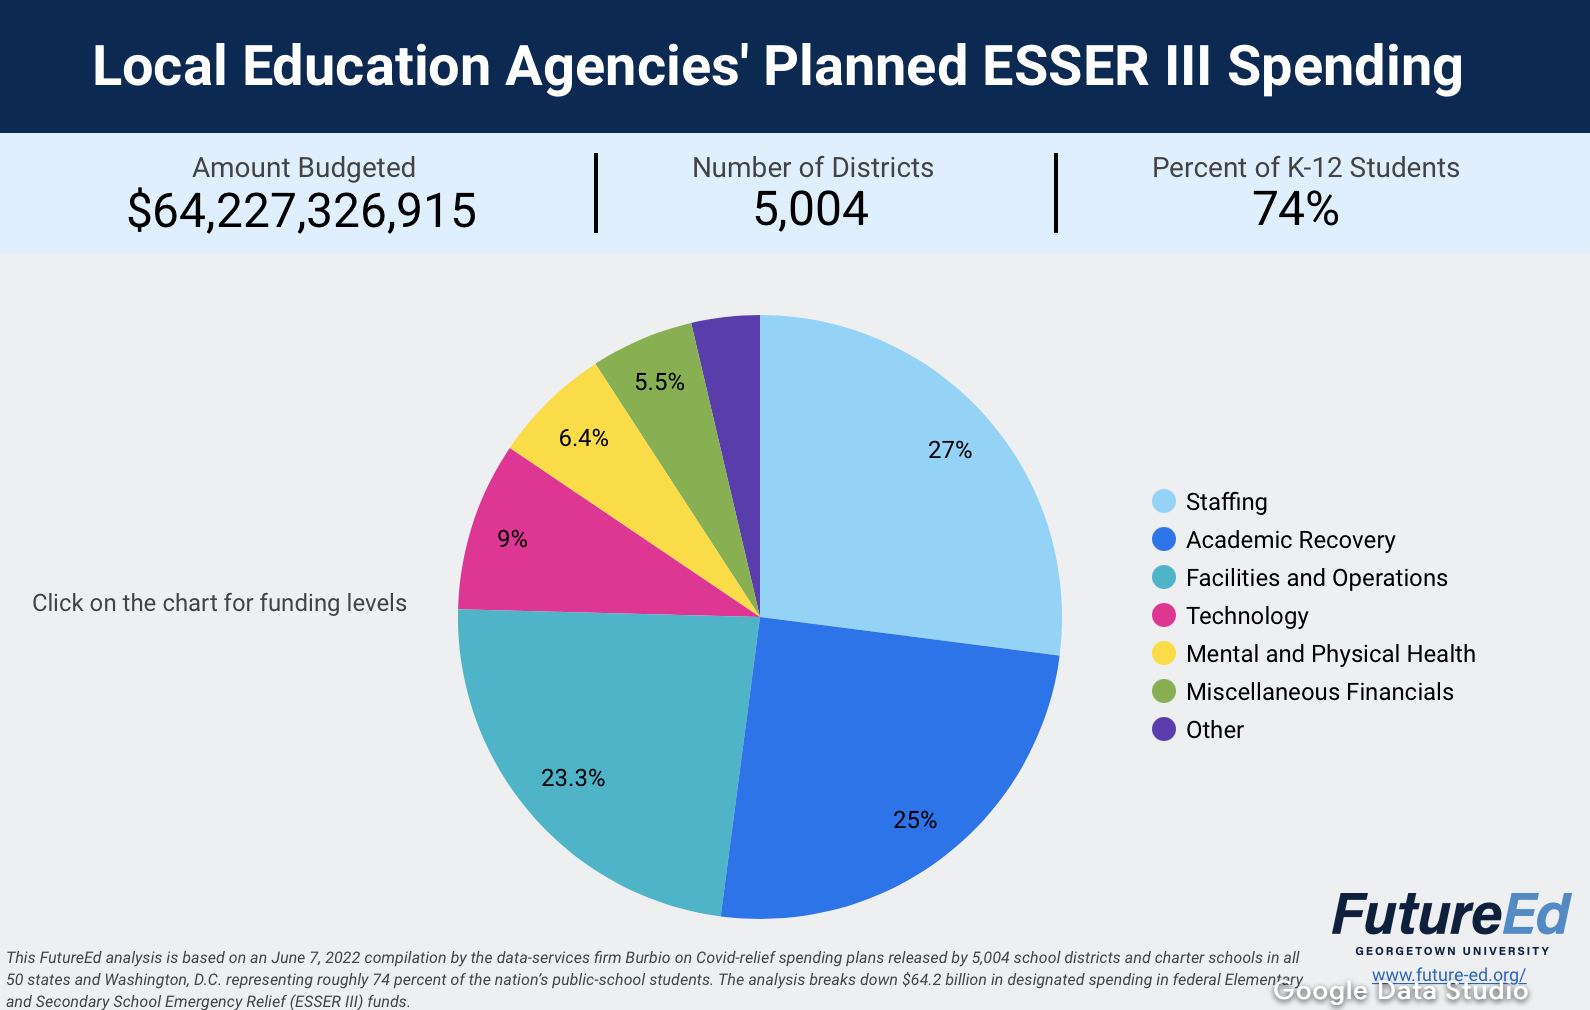 Chart: Local Education Agencies' Planned ESSER III Spending. Amount budgeted: $64,227,326,915. Number of districts: 5,004. Percent of K-12 Students: 74%. Staffing: 27%. Academic recovery: 25%. Facilities and operations: 23.3%. Technology: 9%. Mental and Physical health: 6.4%. Miscellaneous financials: 5.5%. Other: 3.7%. (This FutureEd analysis is based on a June 7, 2022 compilation by the data-services firm Burbio on Covid-relief spending plans released by 5,004 school districts and charter schools in all 50 states and Washington, D.C. representing roughly 74 percent of the nation's public-school students. The analysis breaks down $64.2 billion in designated spending in federal Elementary and Secondary School Emergency Relief (ESSER III) funds.)